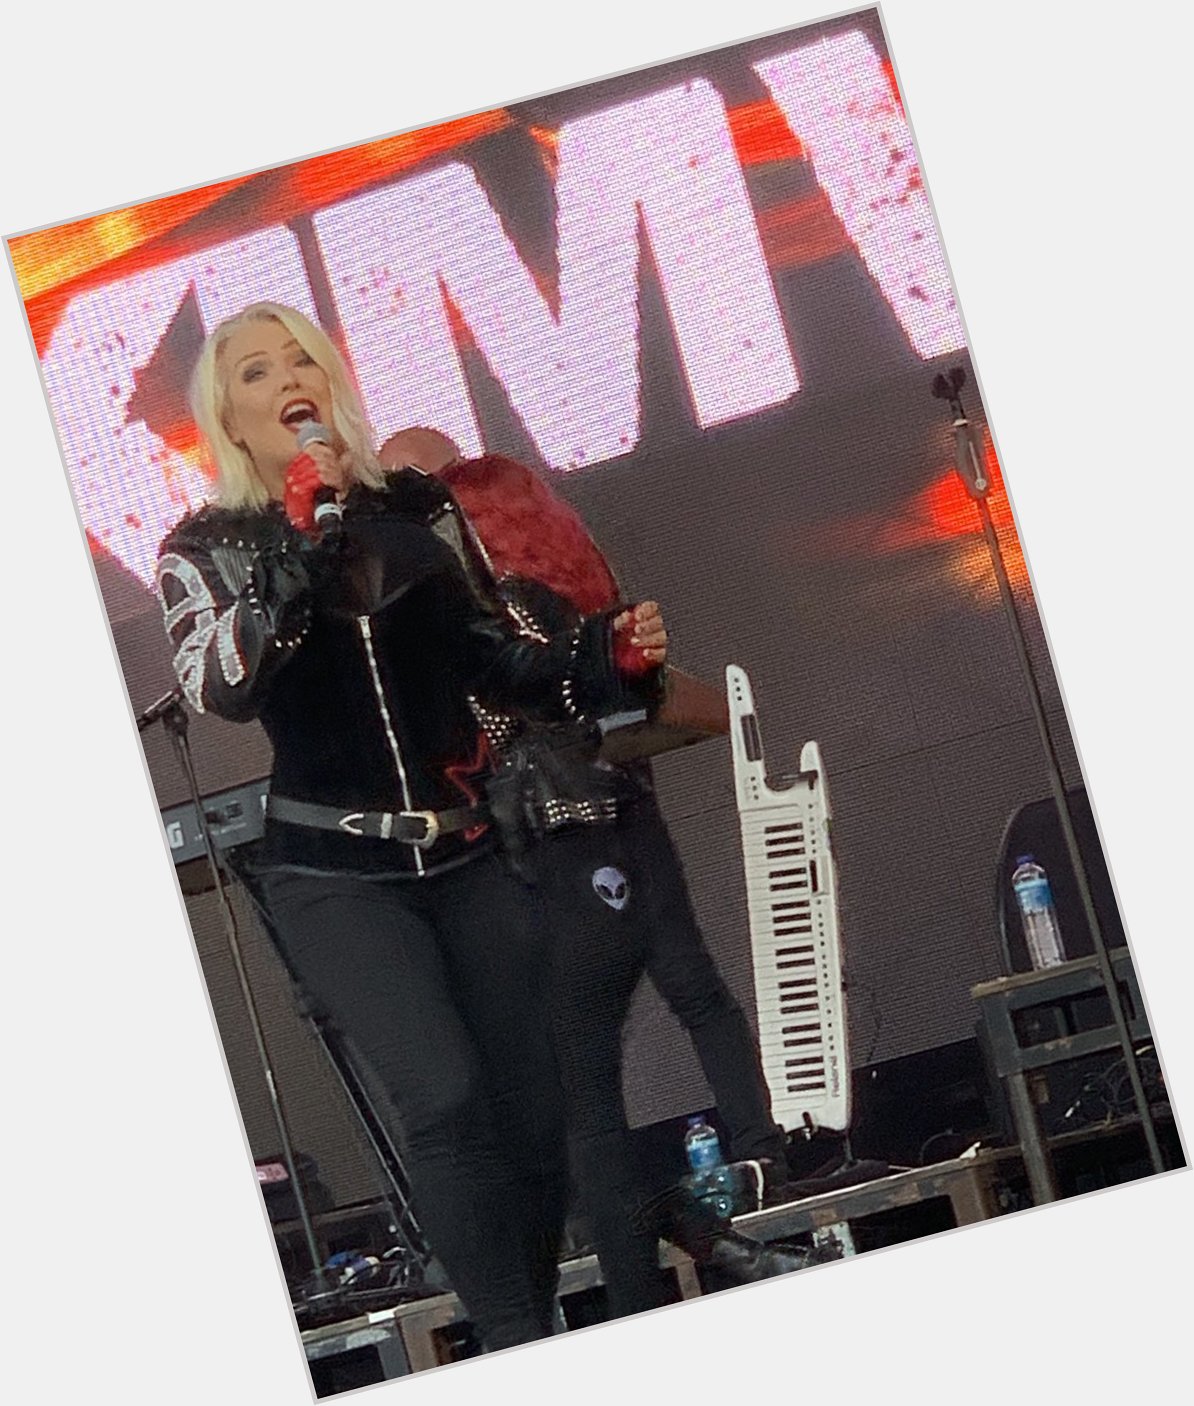 Happy birthday to the gorgeous and talented Kim Wilde. Still great live 